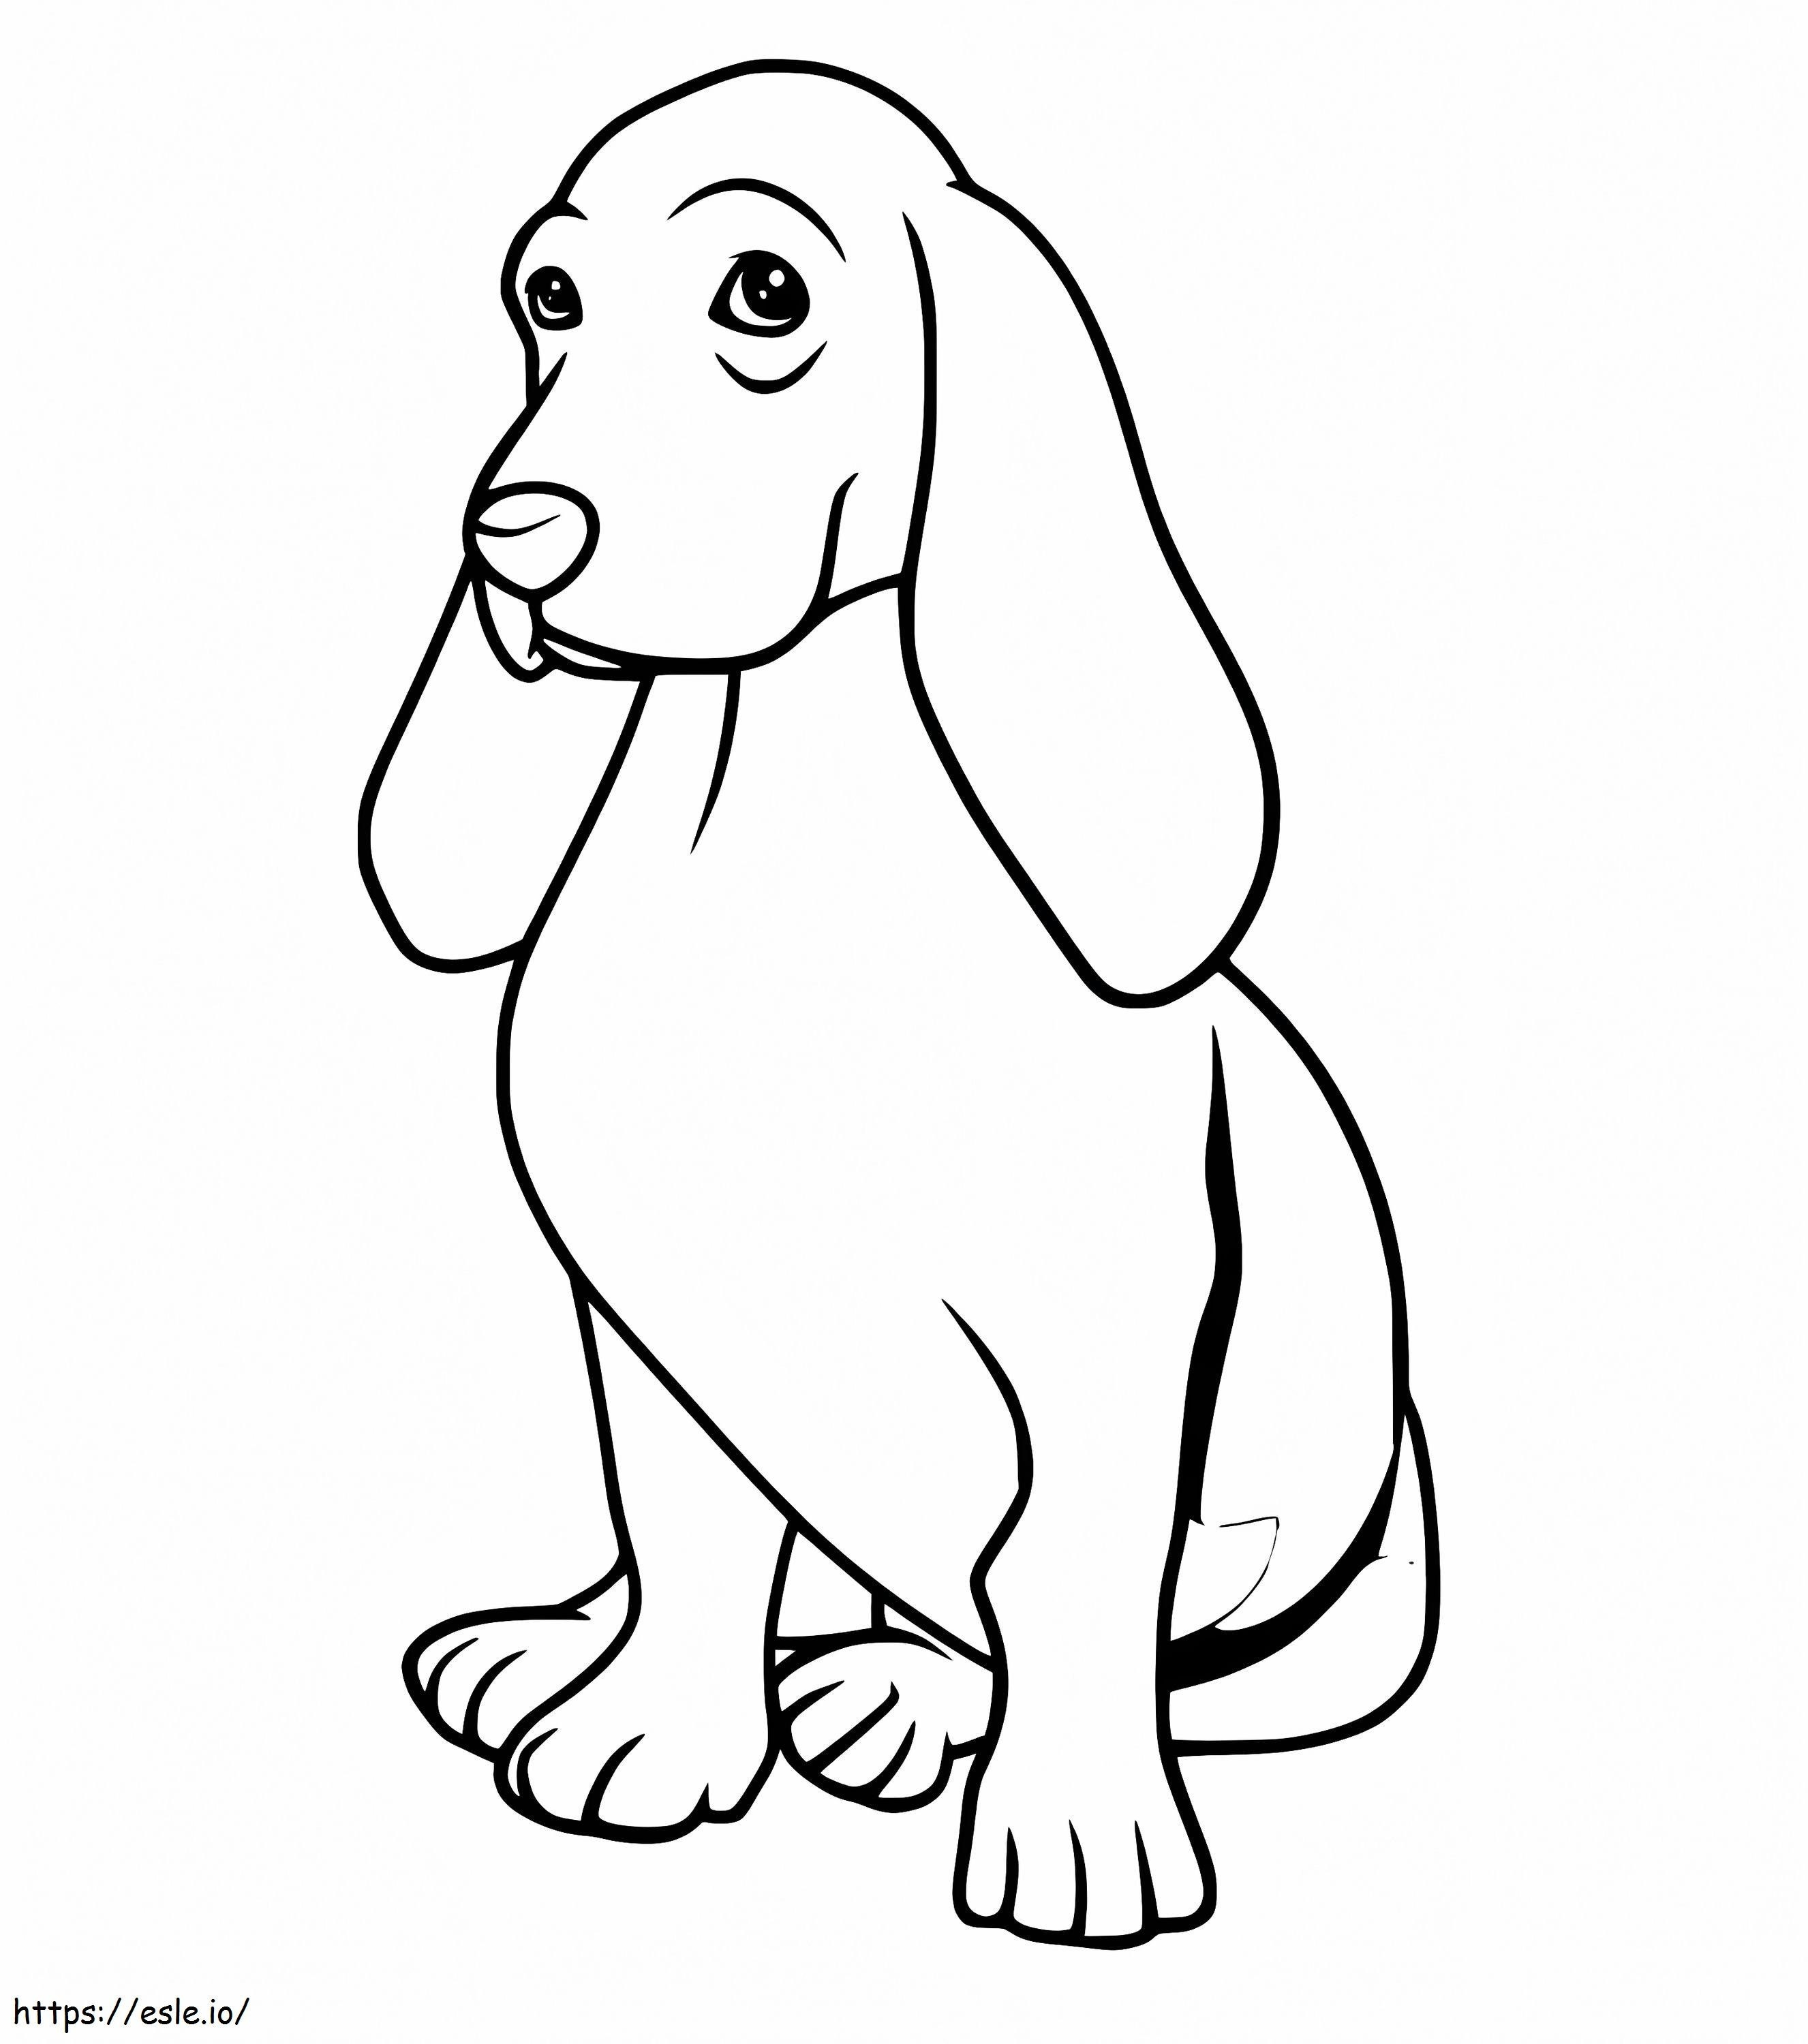 Easy Basset Hound coloring page